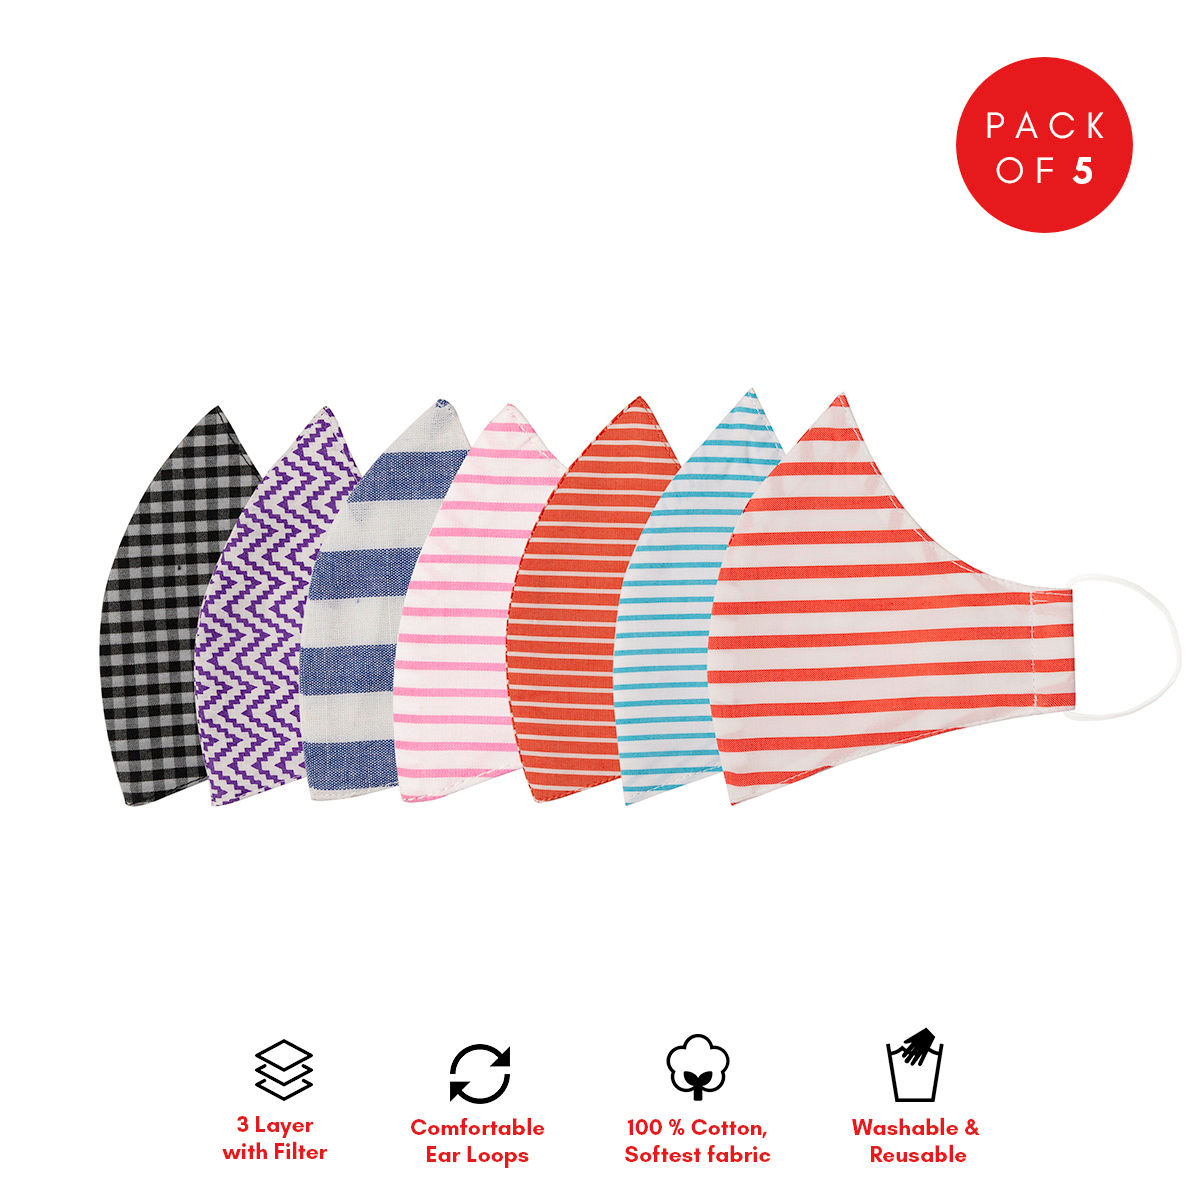 The Mask Company Three Ply 100% Cotton Mask for Adults Stripes and Checks - Multi-Color (Pack of 5)